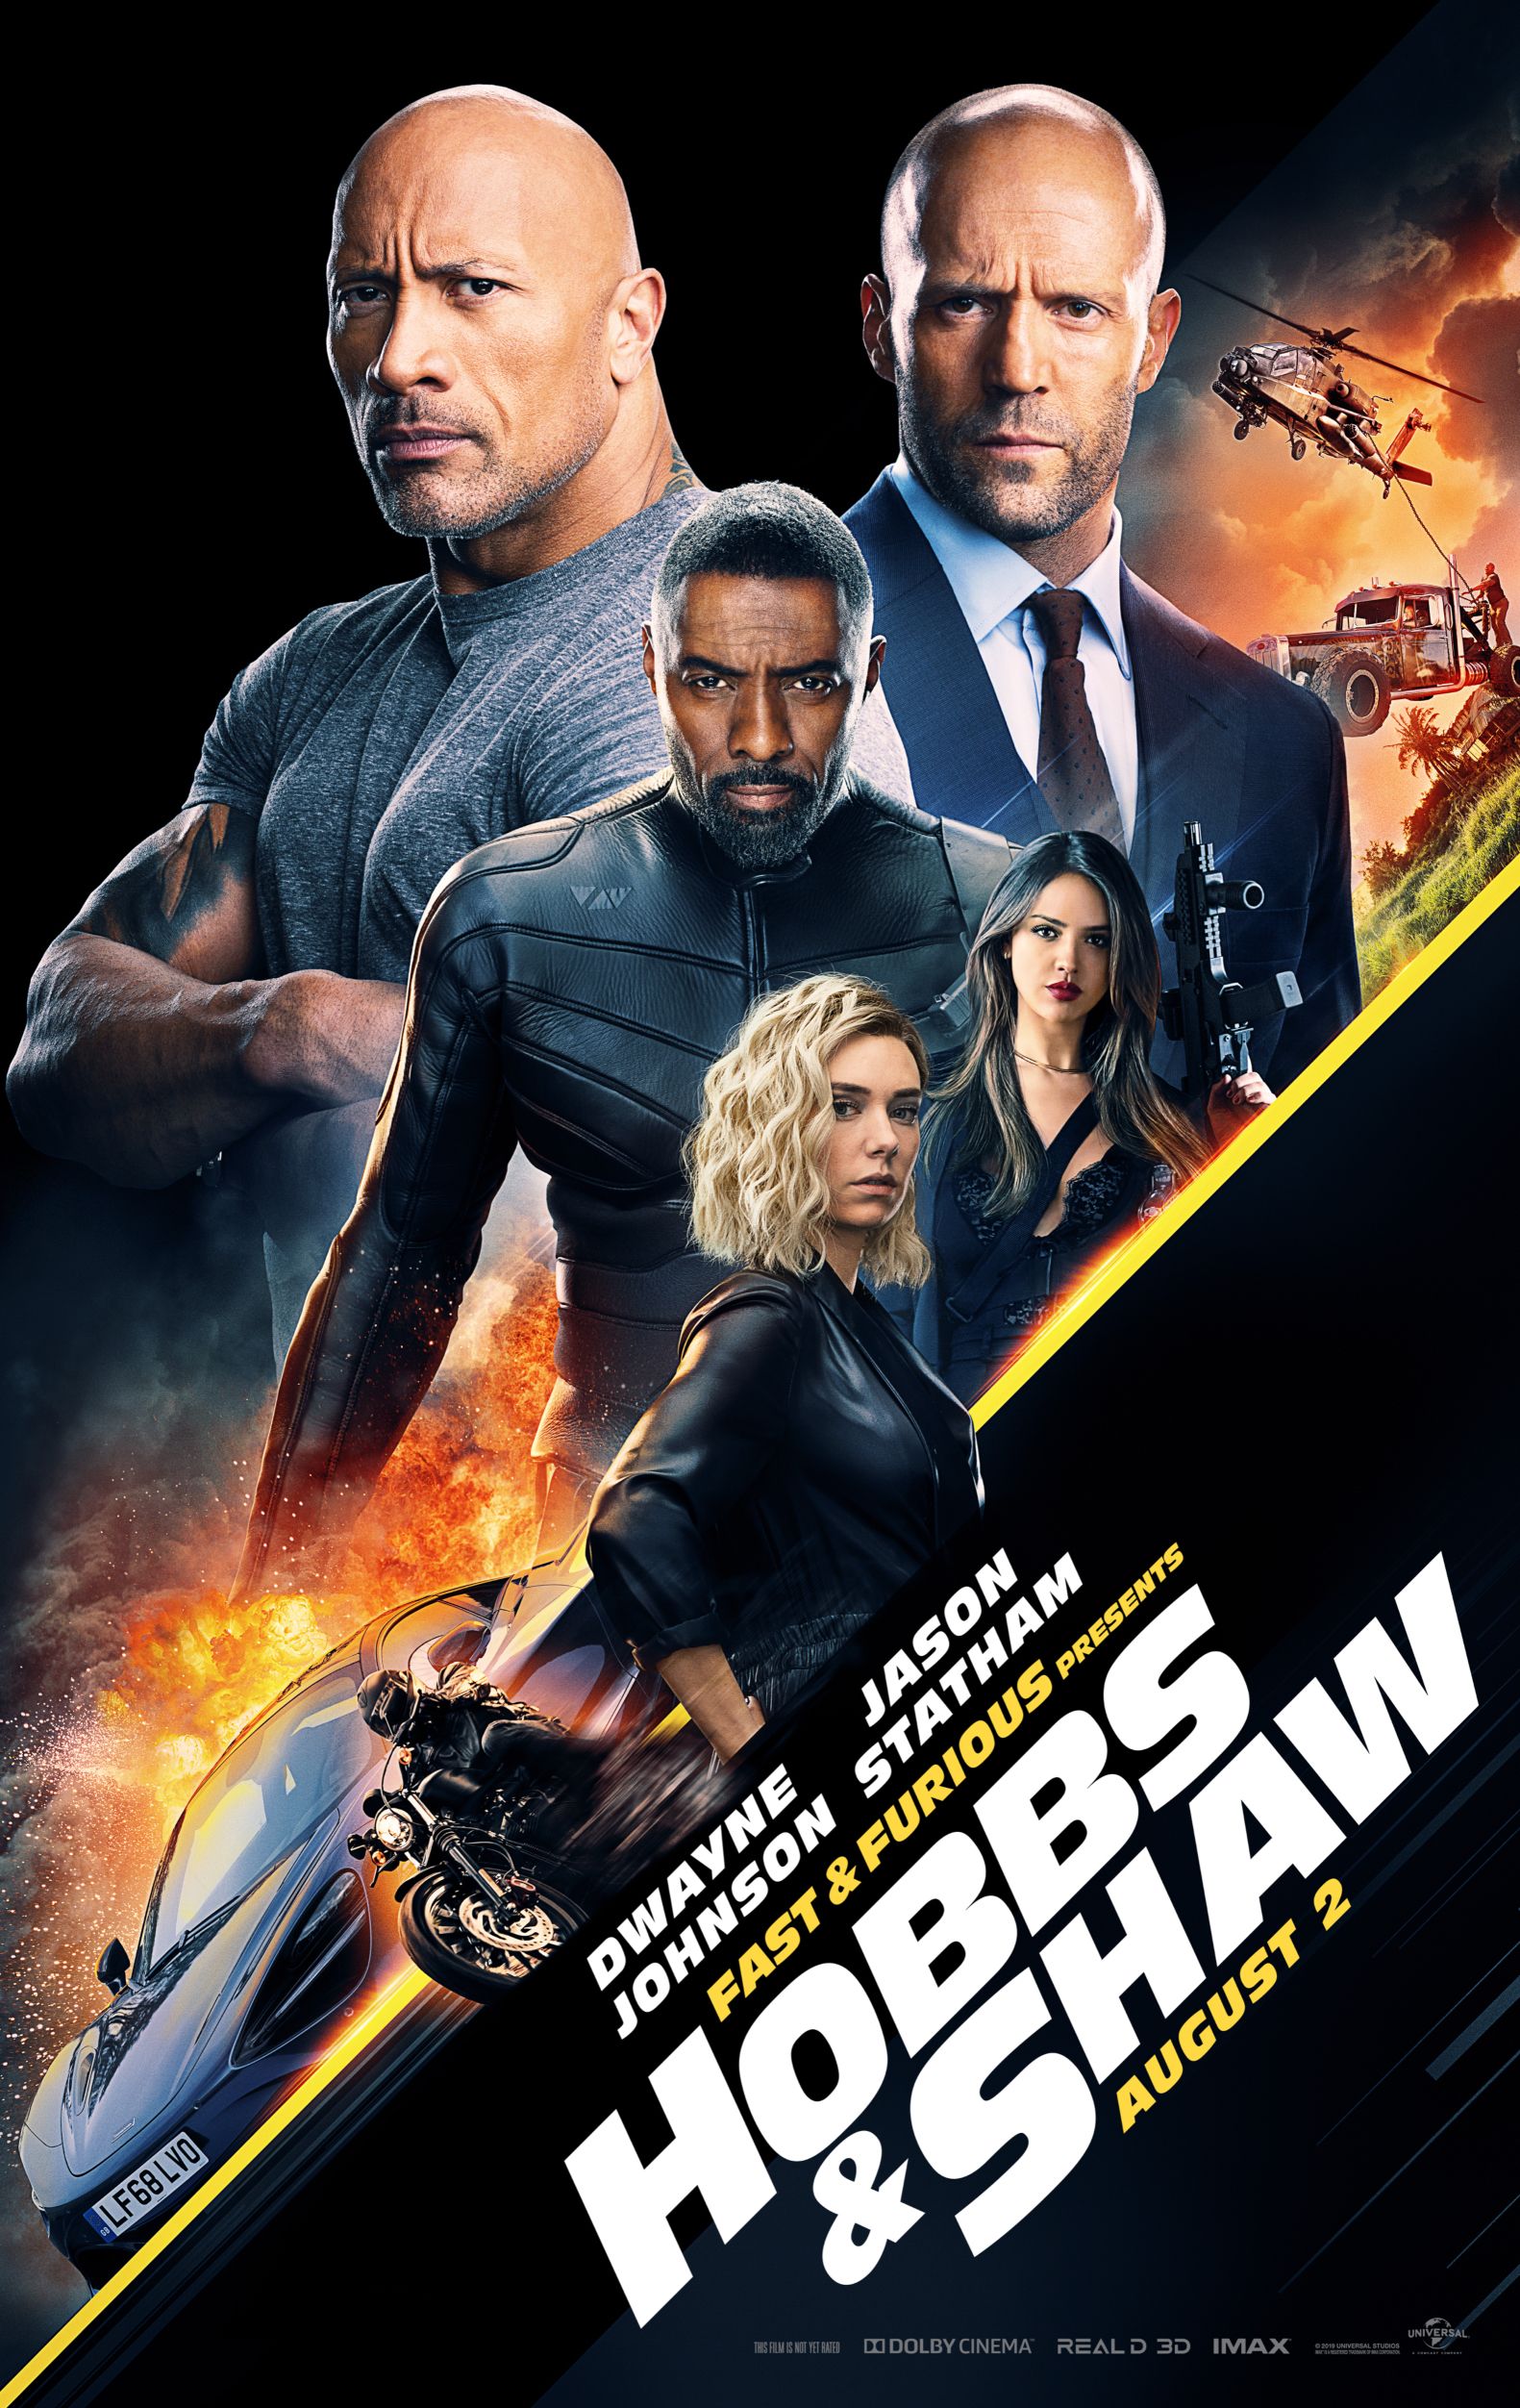 Hobbs and Shaw poster